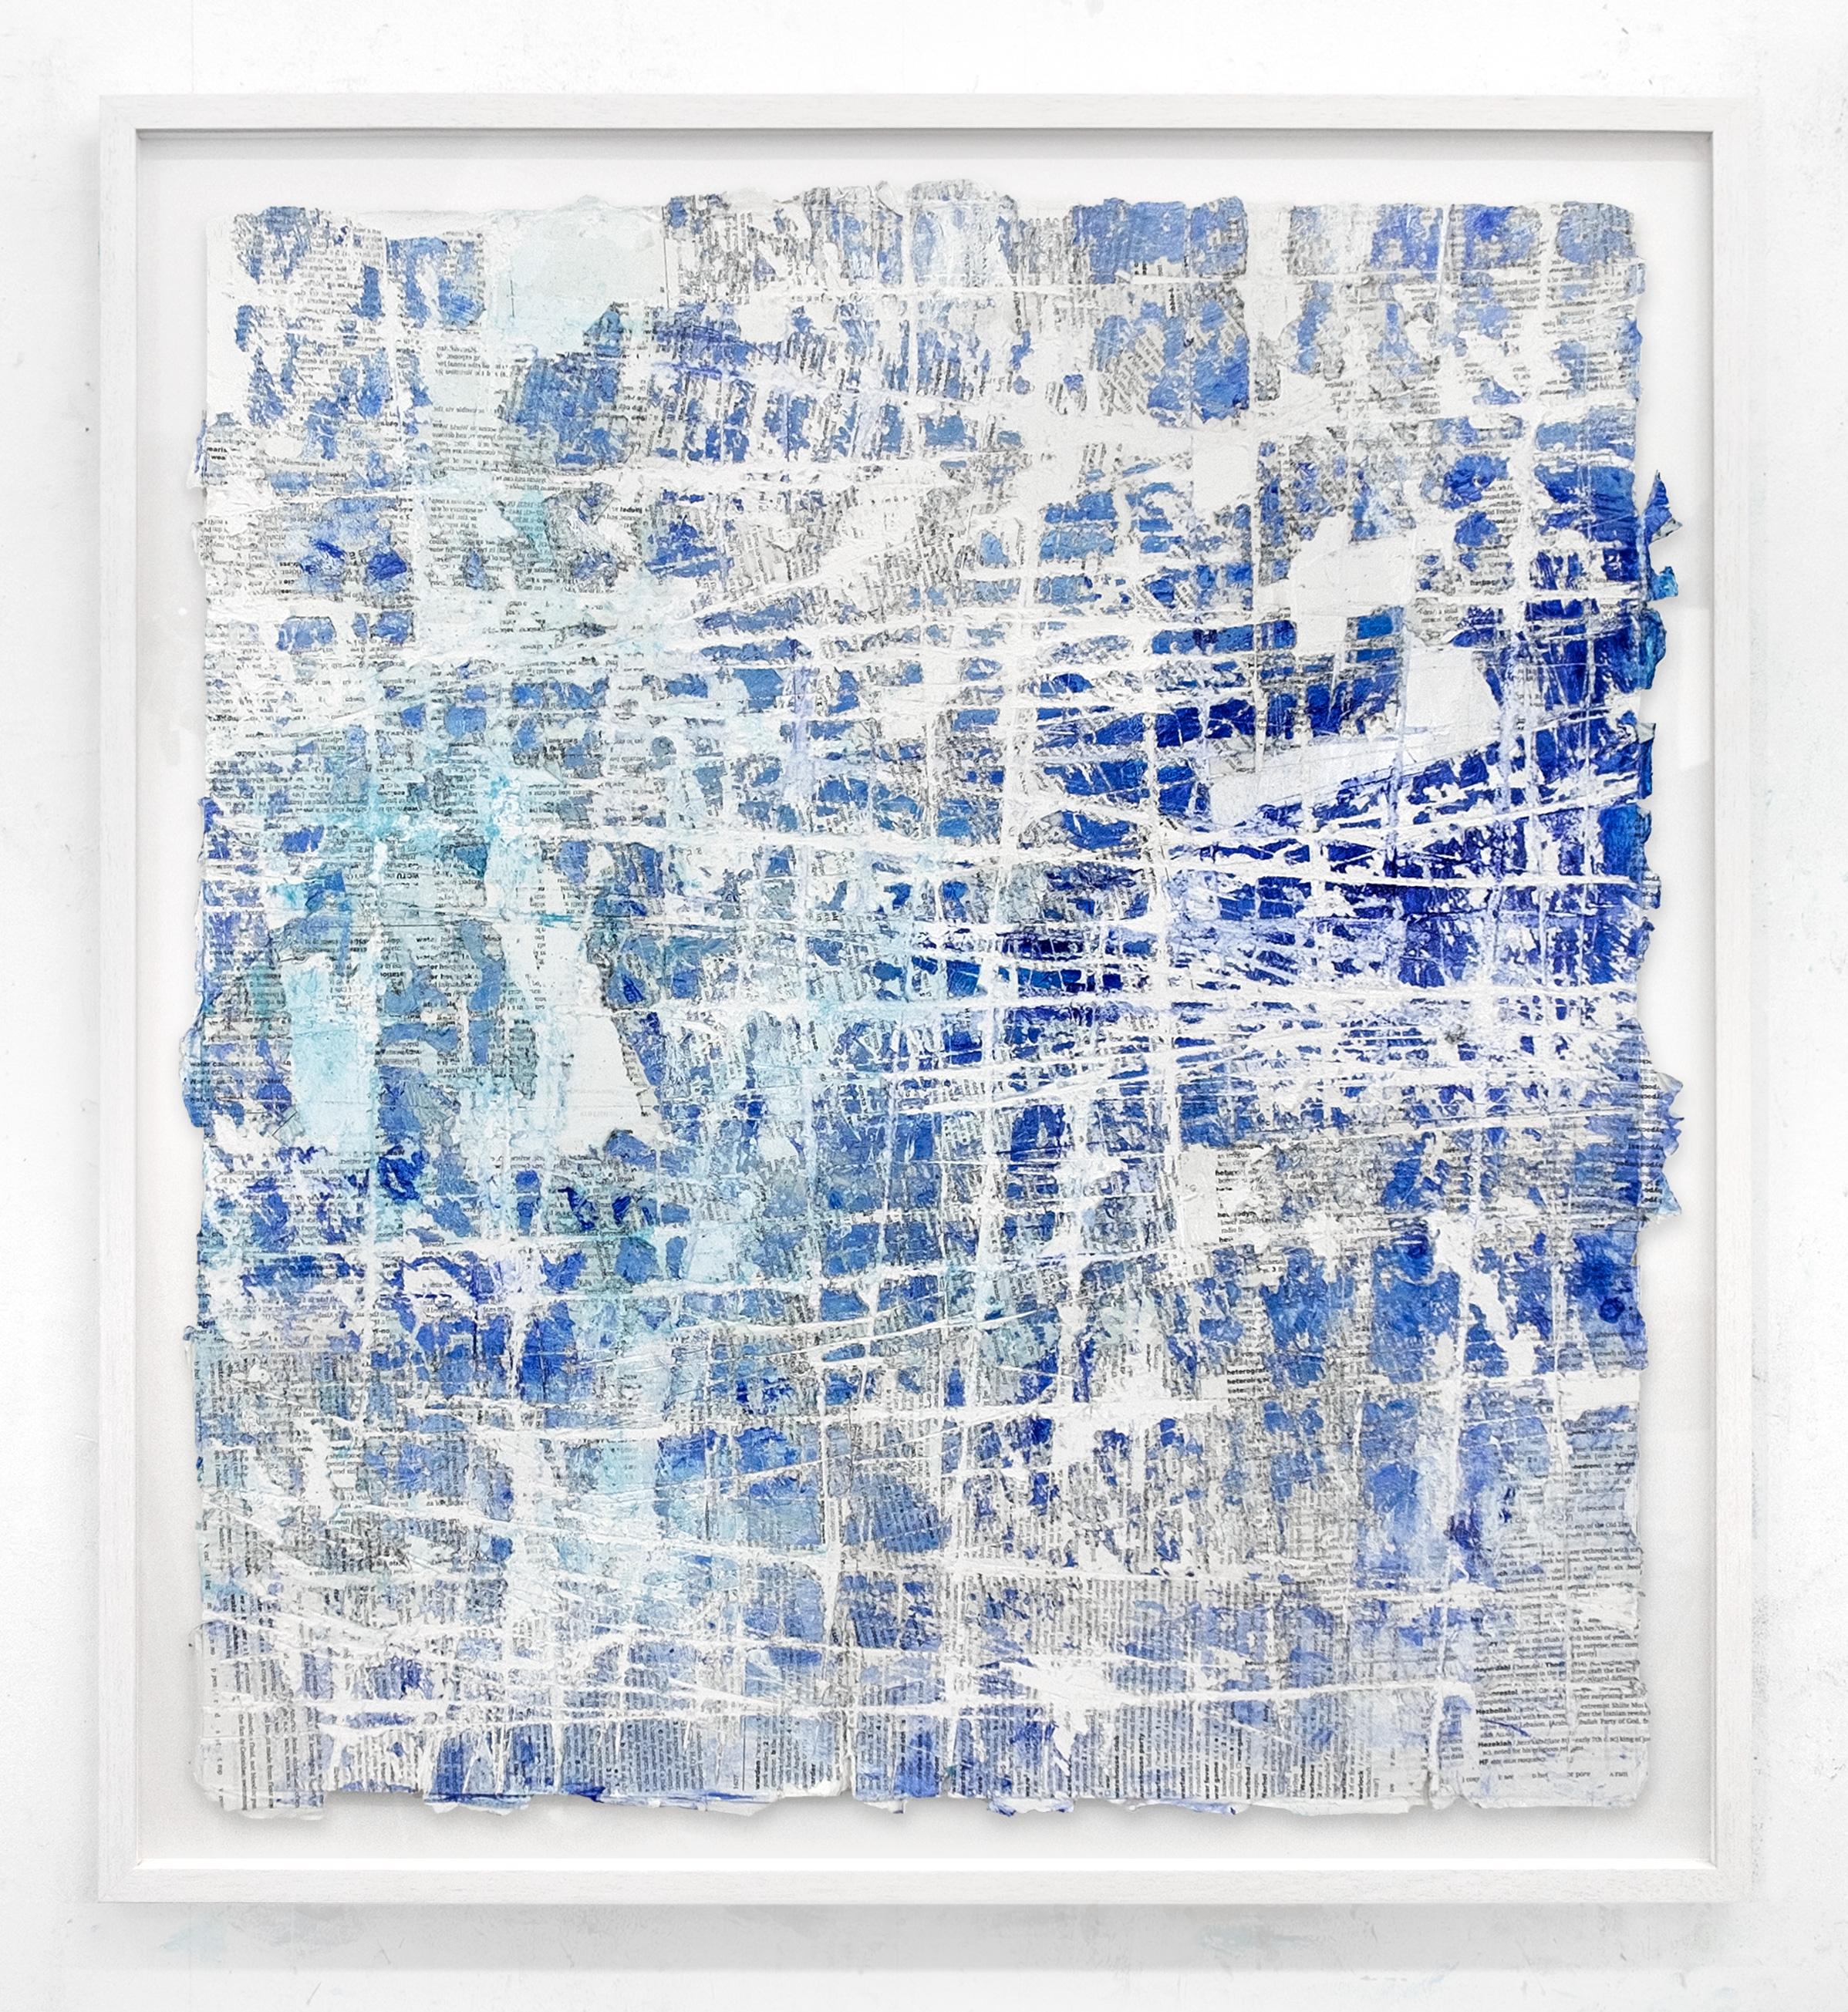 David Fredrik Moussallem Abstract Painting - Safe to Say - street art blue and white abstract painting on paper framed